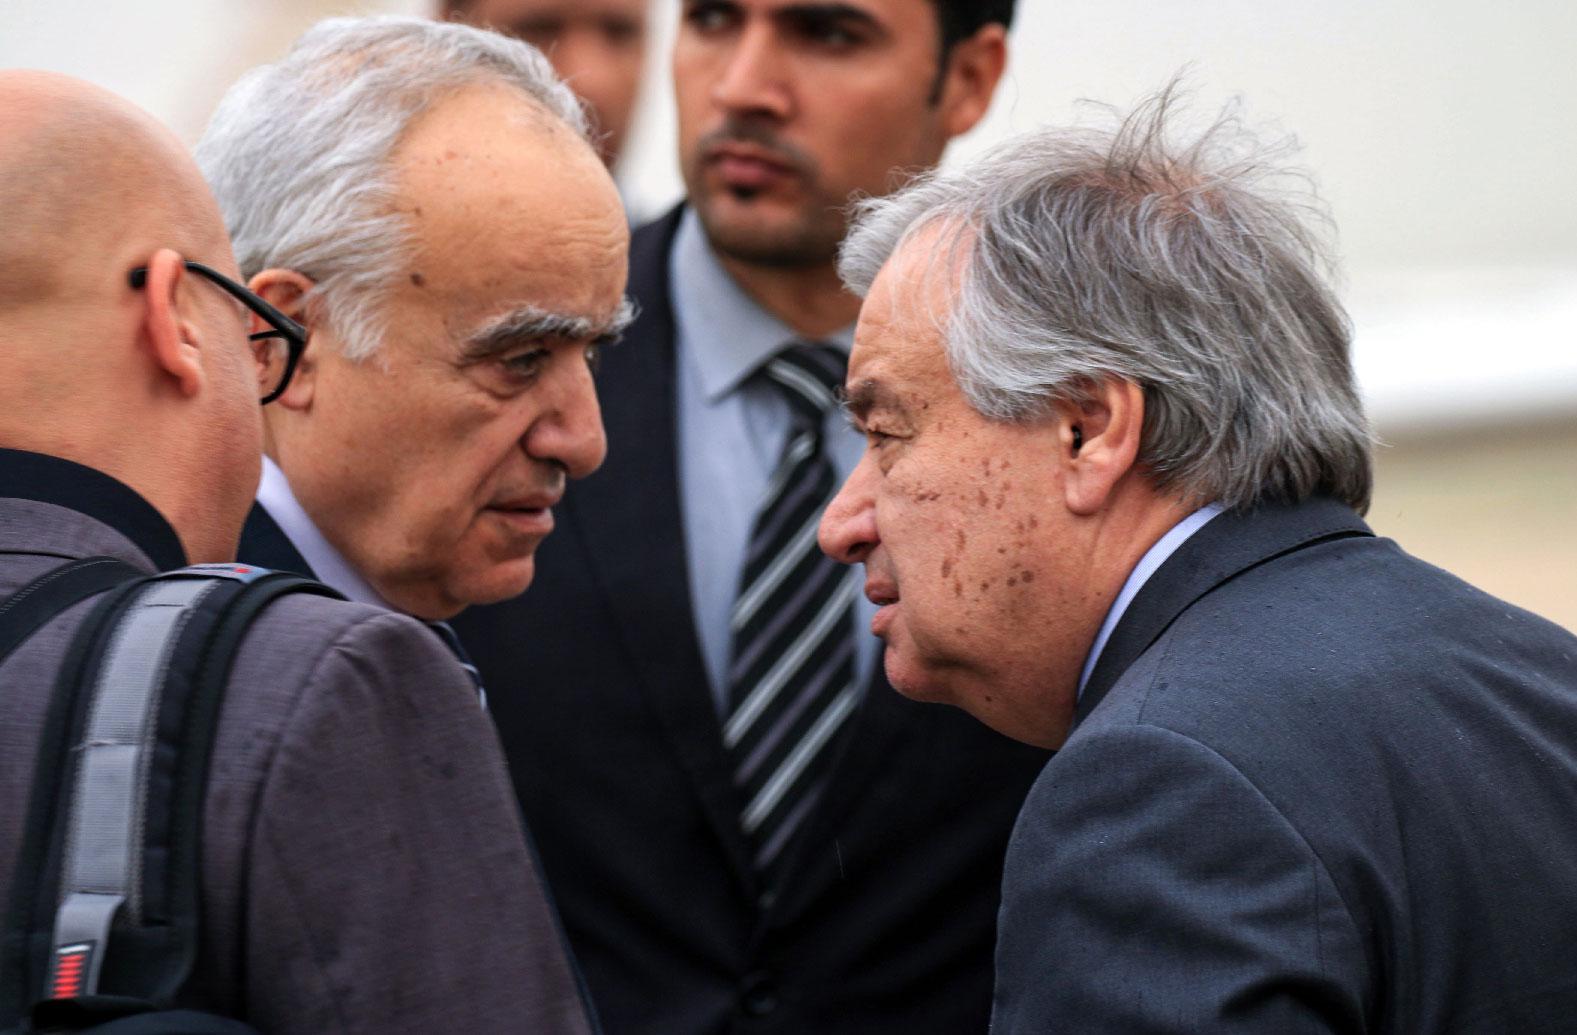 United Nations Secretary-General Antonio Guterres (R) speaks with Ghassan Salame (L), UN special envoy for Libya and head of the UN Support Mission in Libya (UNSMIL), at Benina International Airport in Libya's eastern city of Benghazi on April 5, 2019.